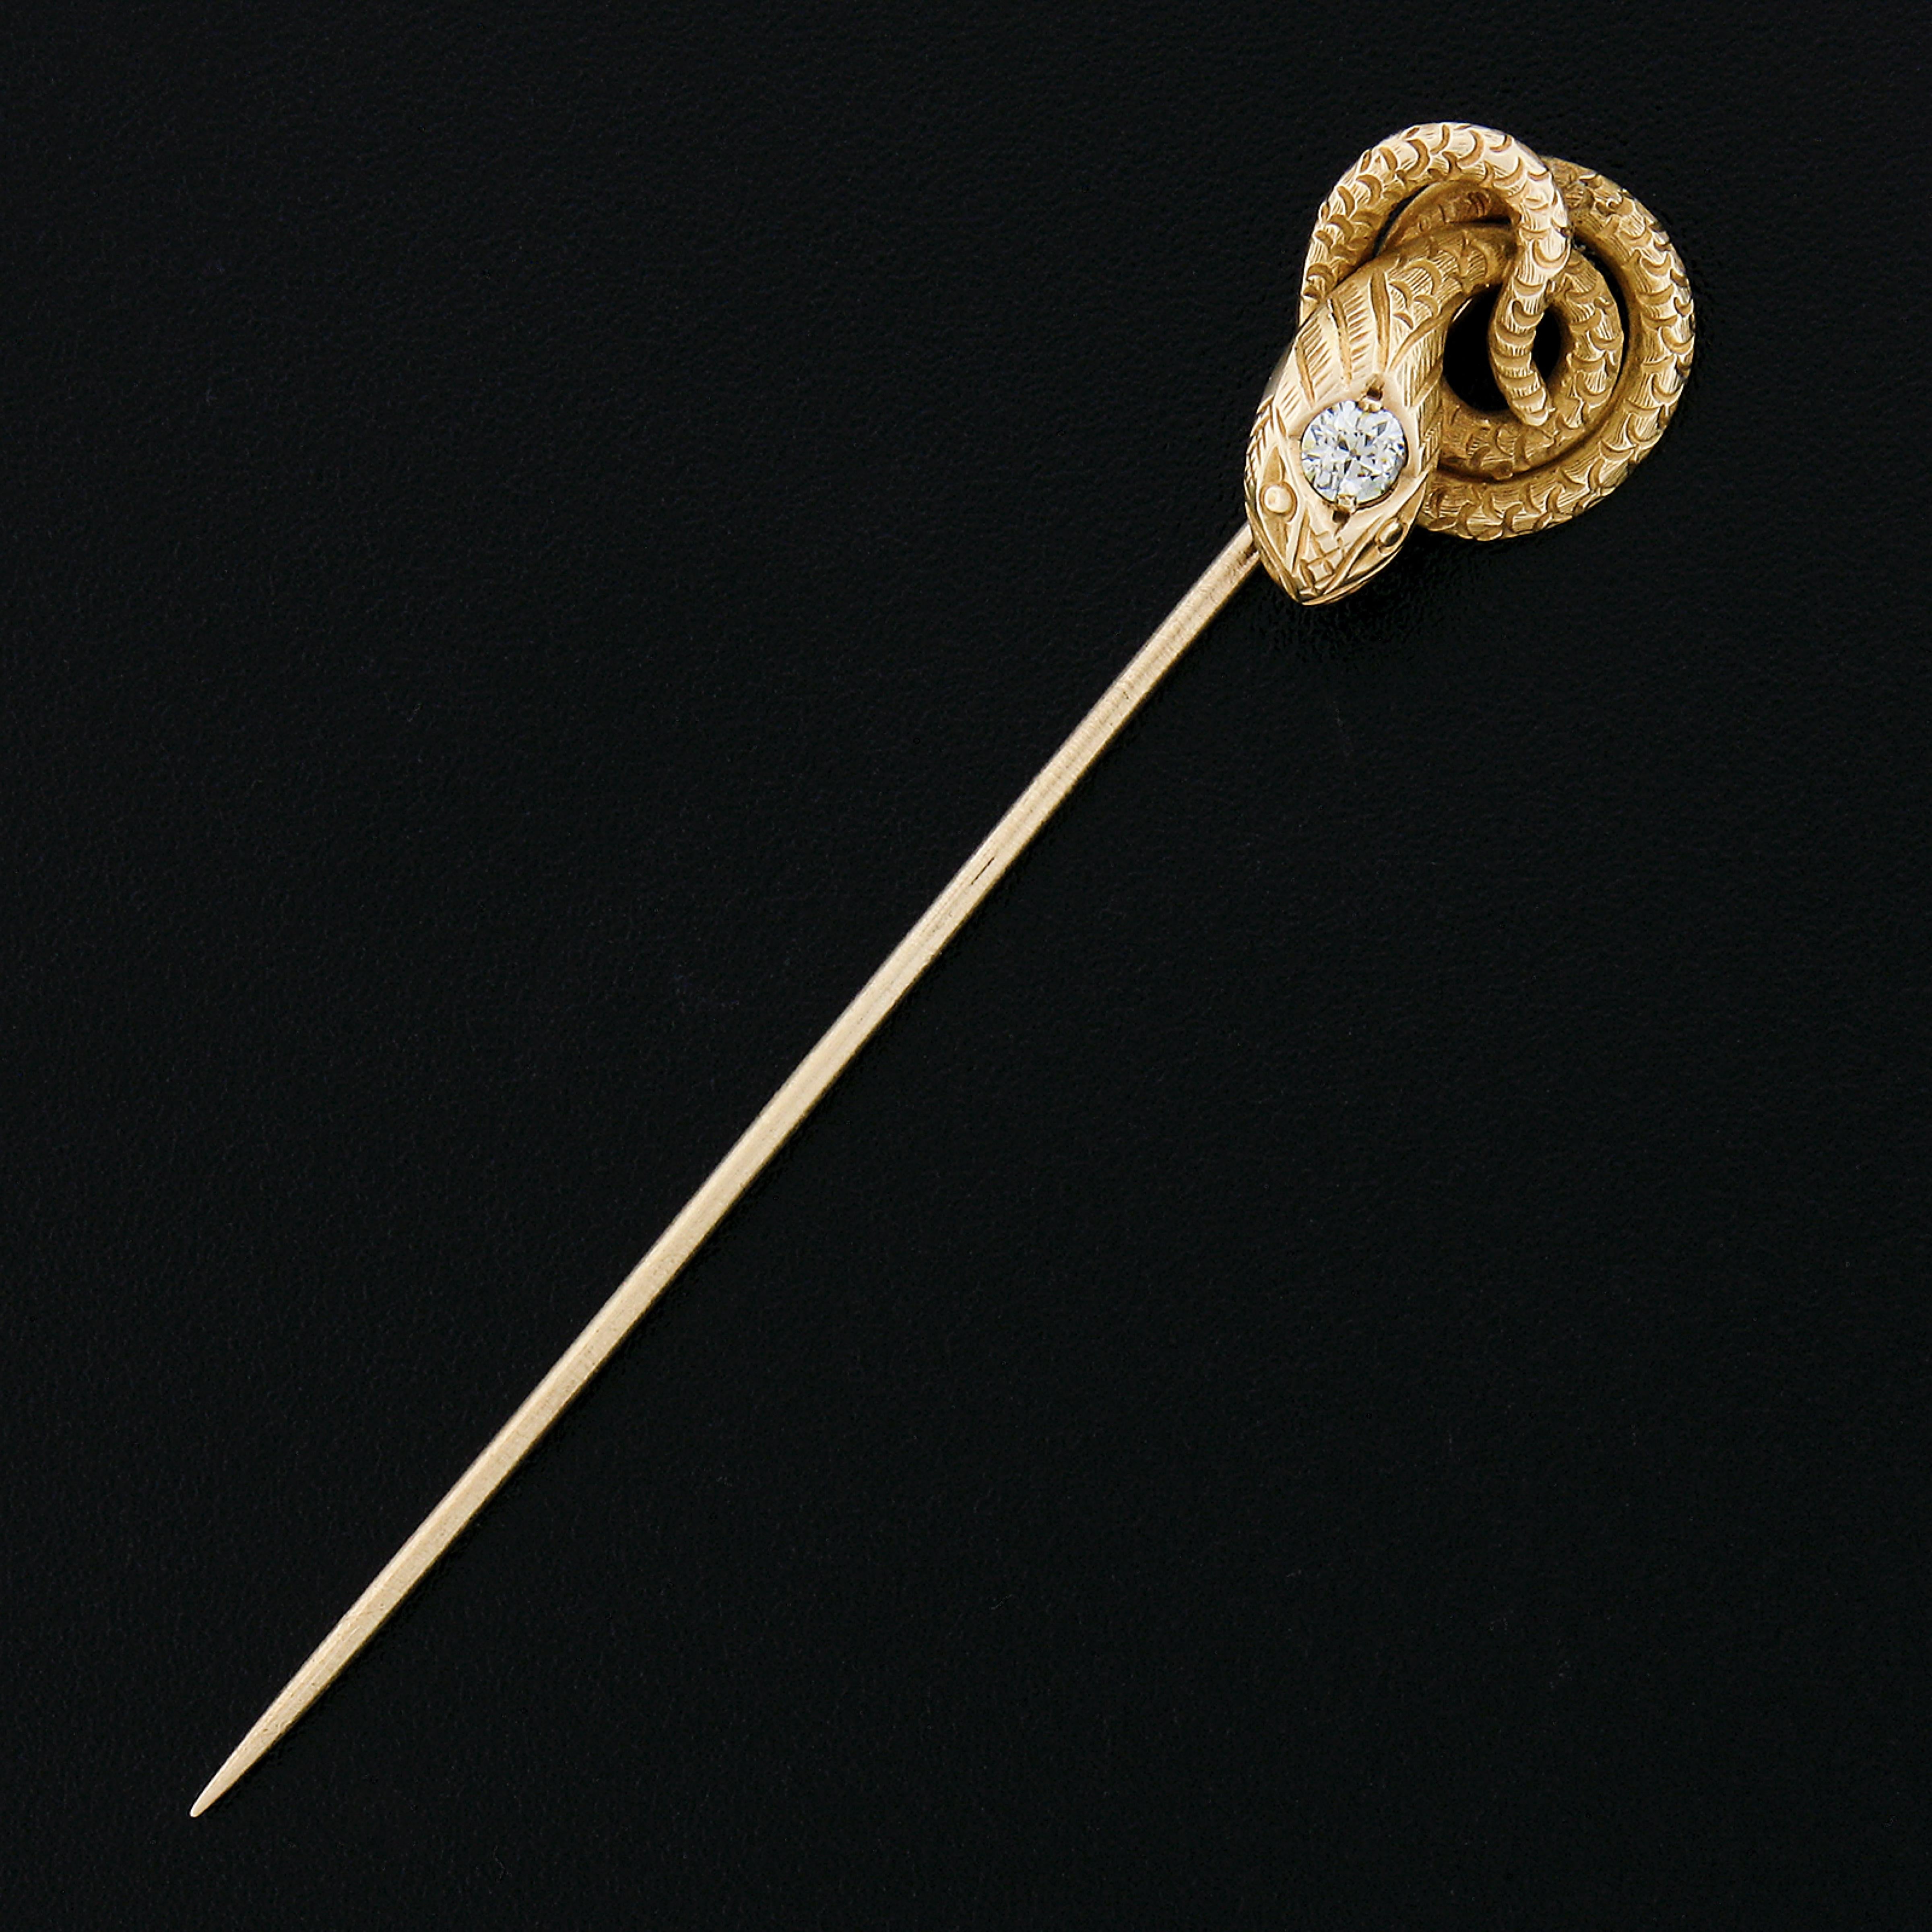 This antique stick pin was crafted during the Victorian era from solid 14k yellow gold. It displays at its top an outstanding coiled snake design showing absolutely amazing detail and texture throughout. The snake is adorned with an old European cut